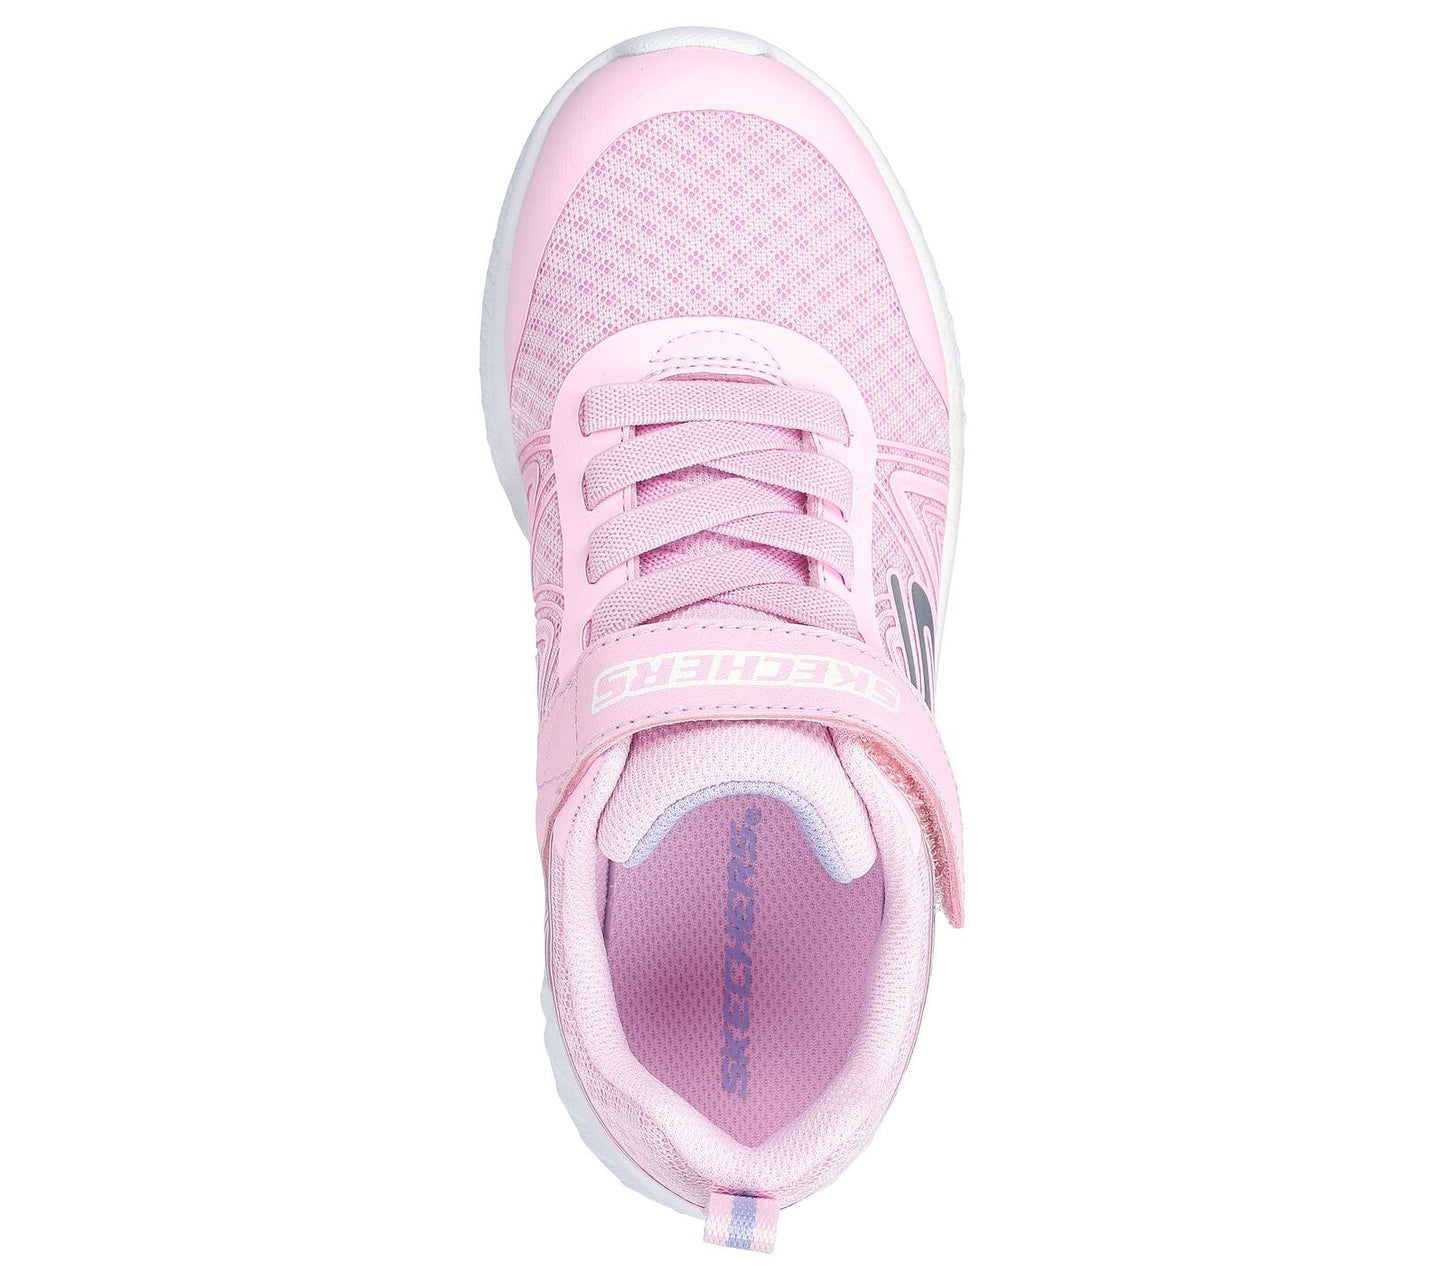 Skechers Swirl Sweet in pink, featuring the Skechers logo. Velcro fastening with flat elastic bungee laces. Top view.